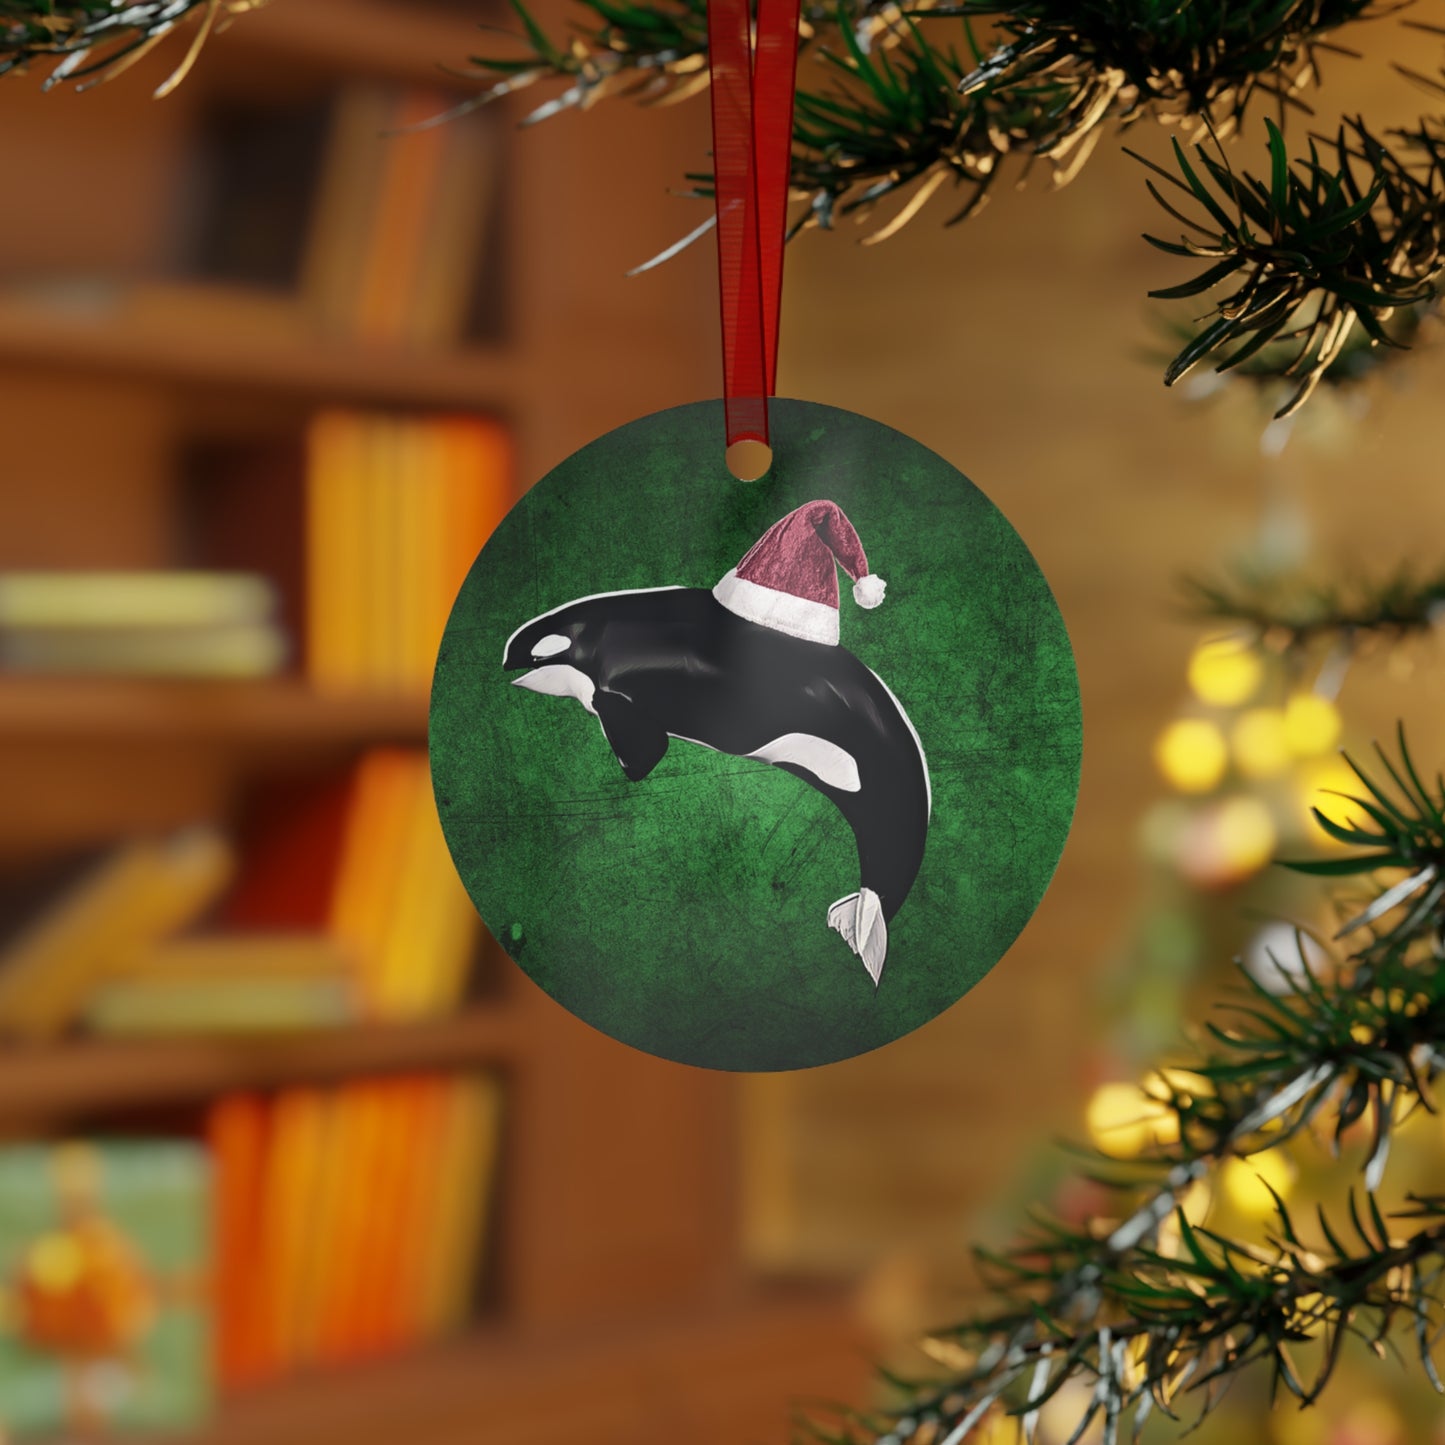 Holiday Orca (Killer Whale) with Santa Hat Metal Ornaments